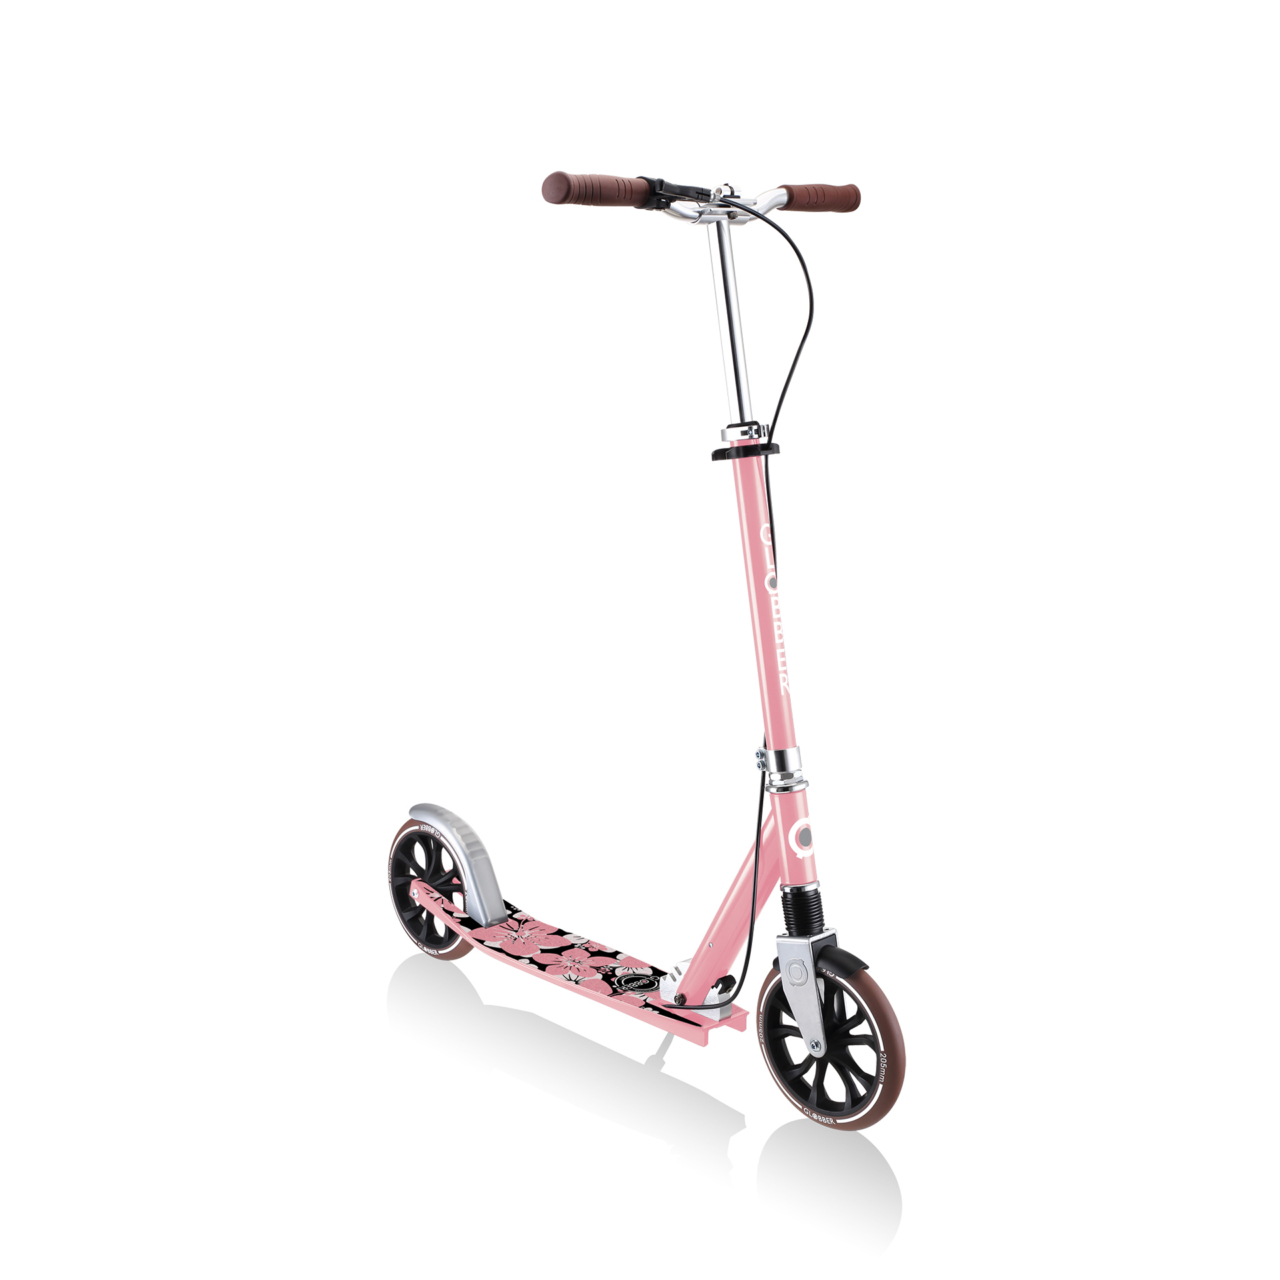 685 210 Big Wheel Scooter For Kids And Teens